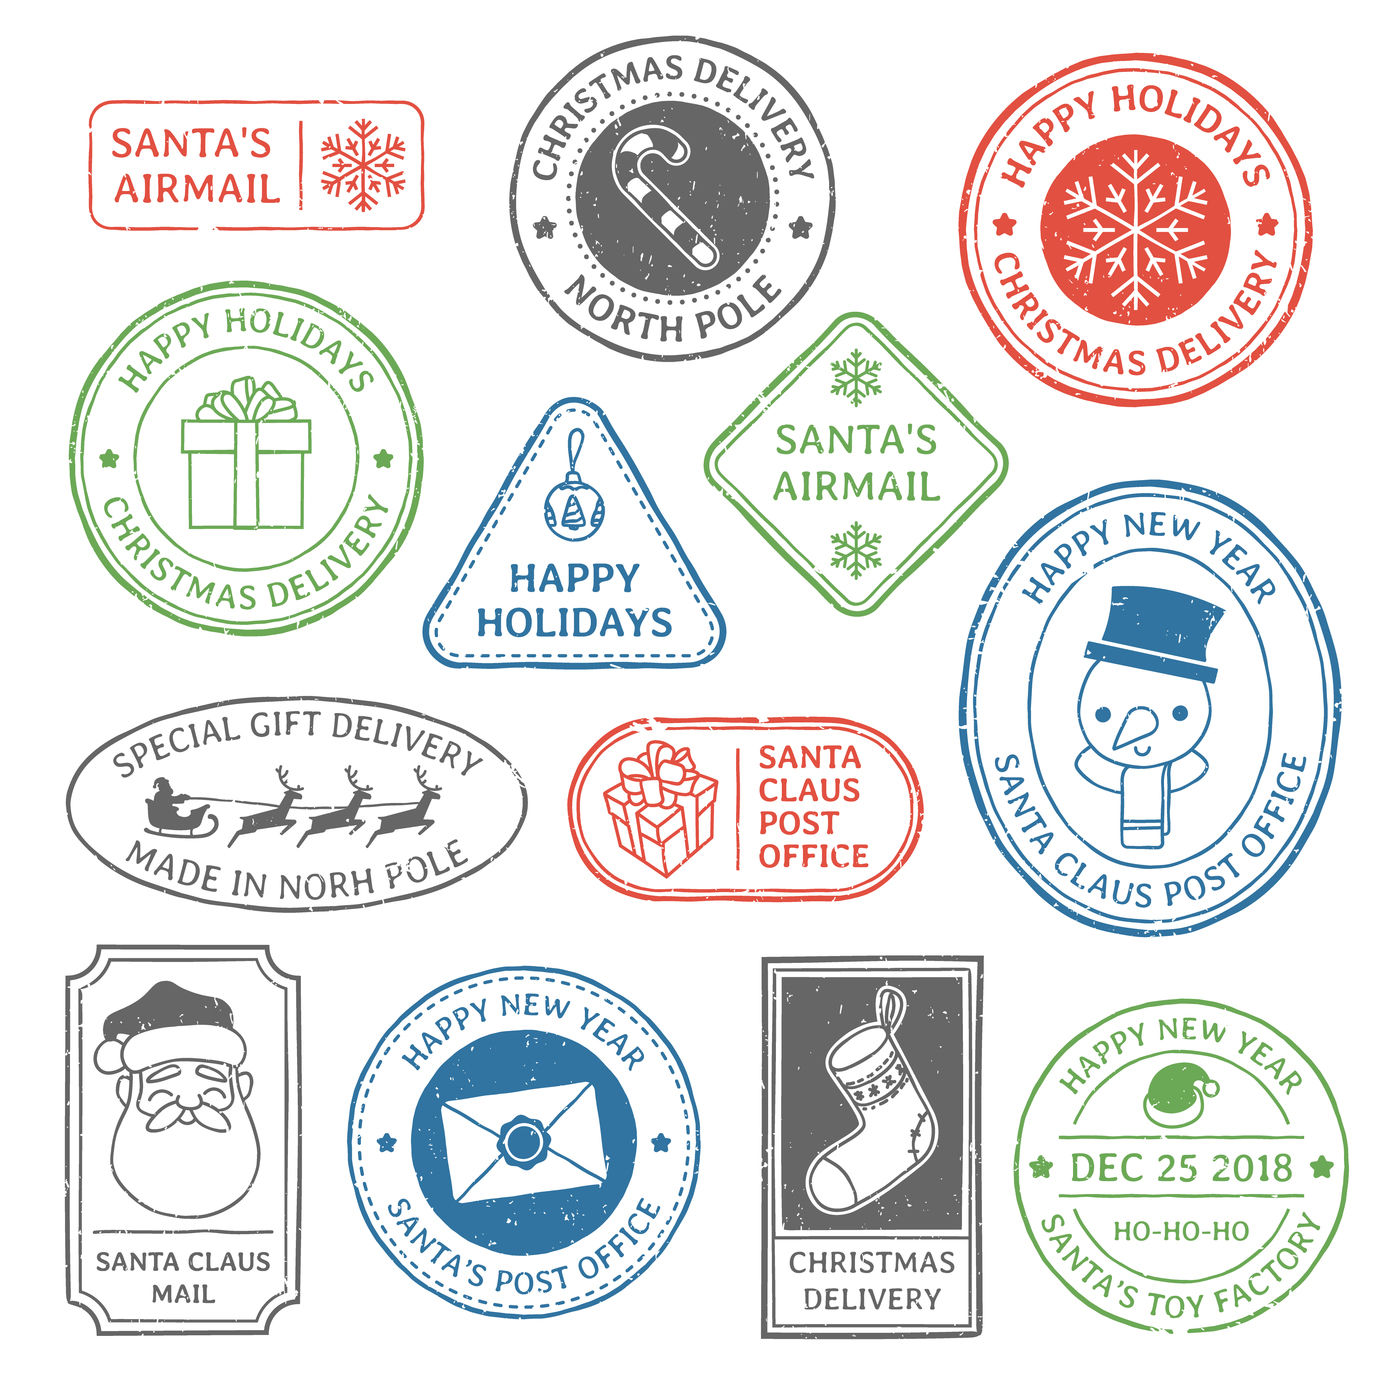 santa-claus-post-stamp-christmas-mail-letter-stamps-north-pole-postm